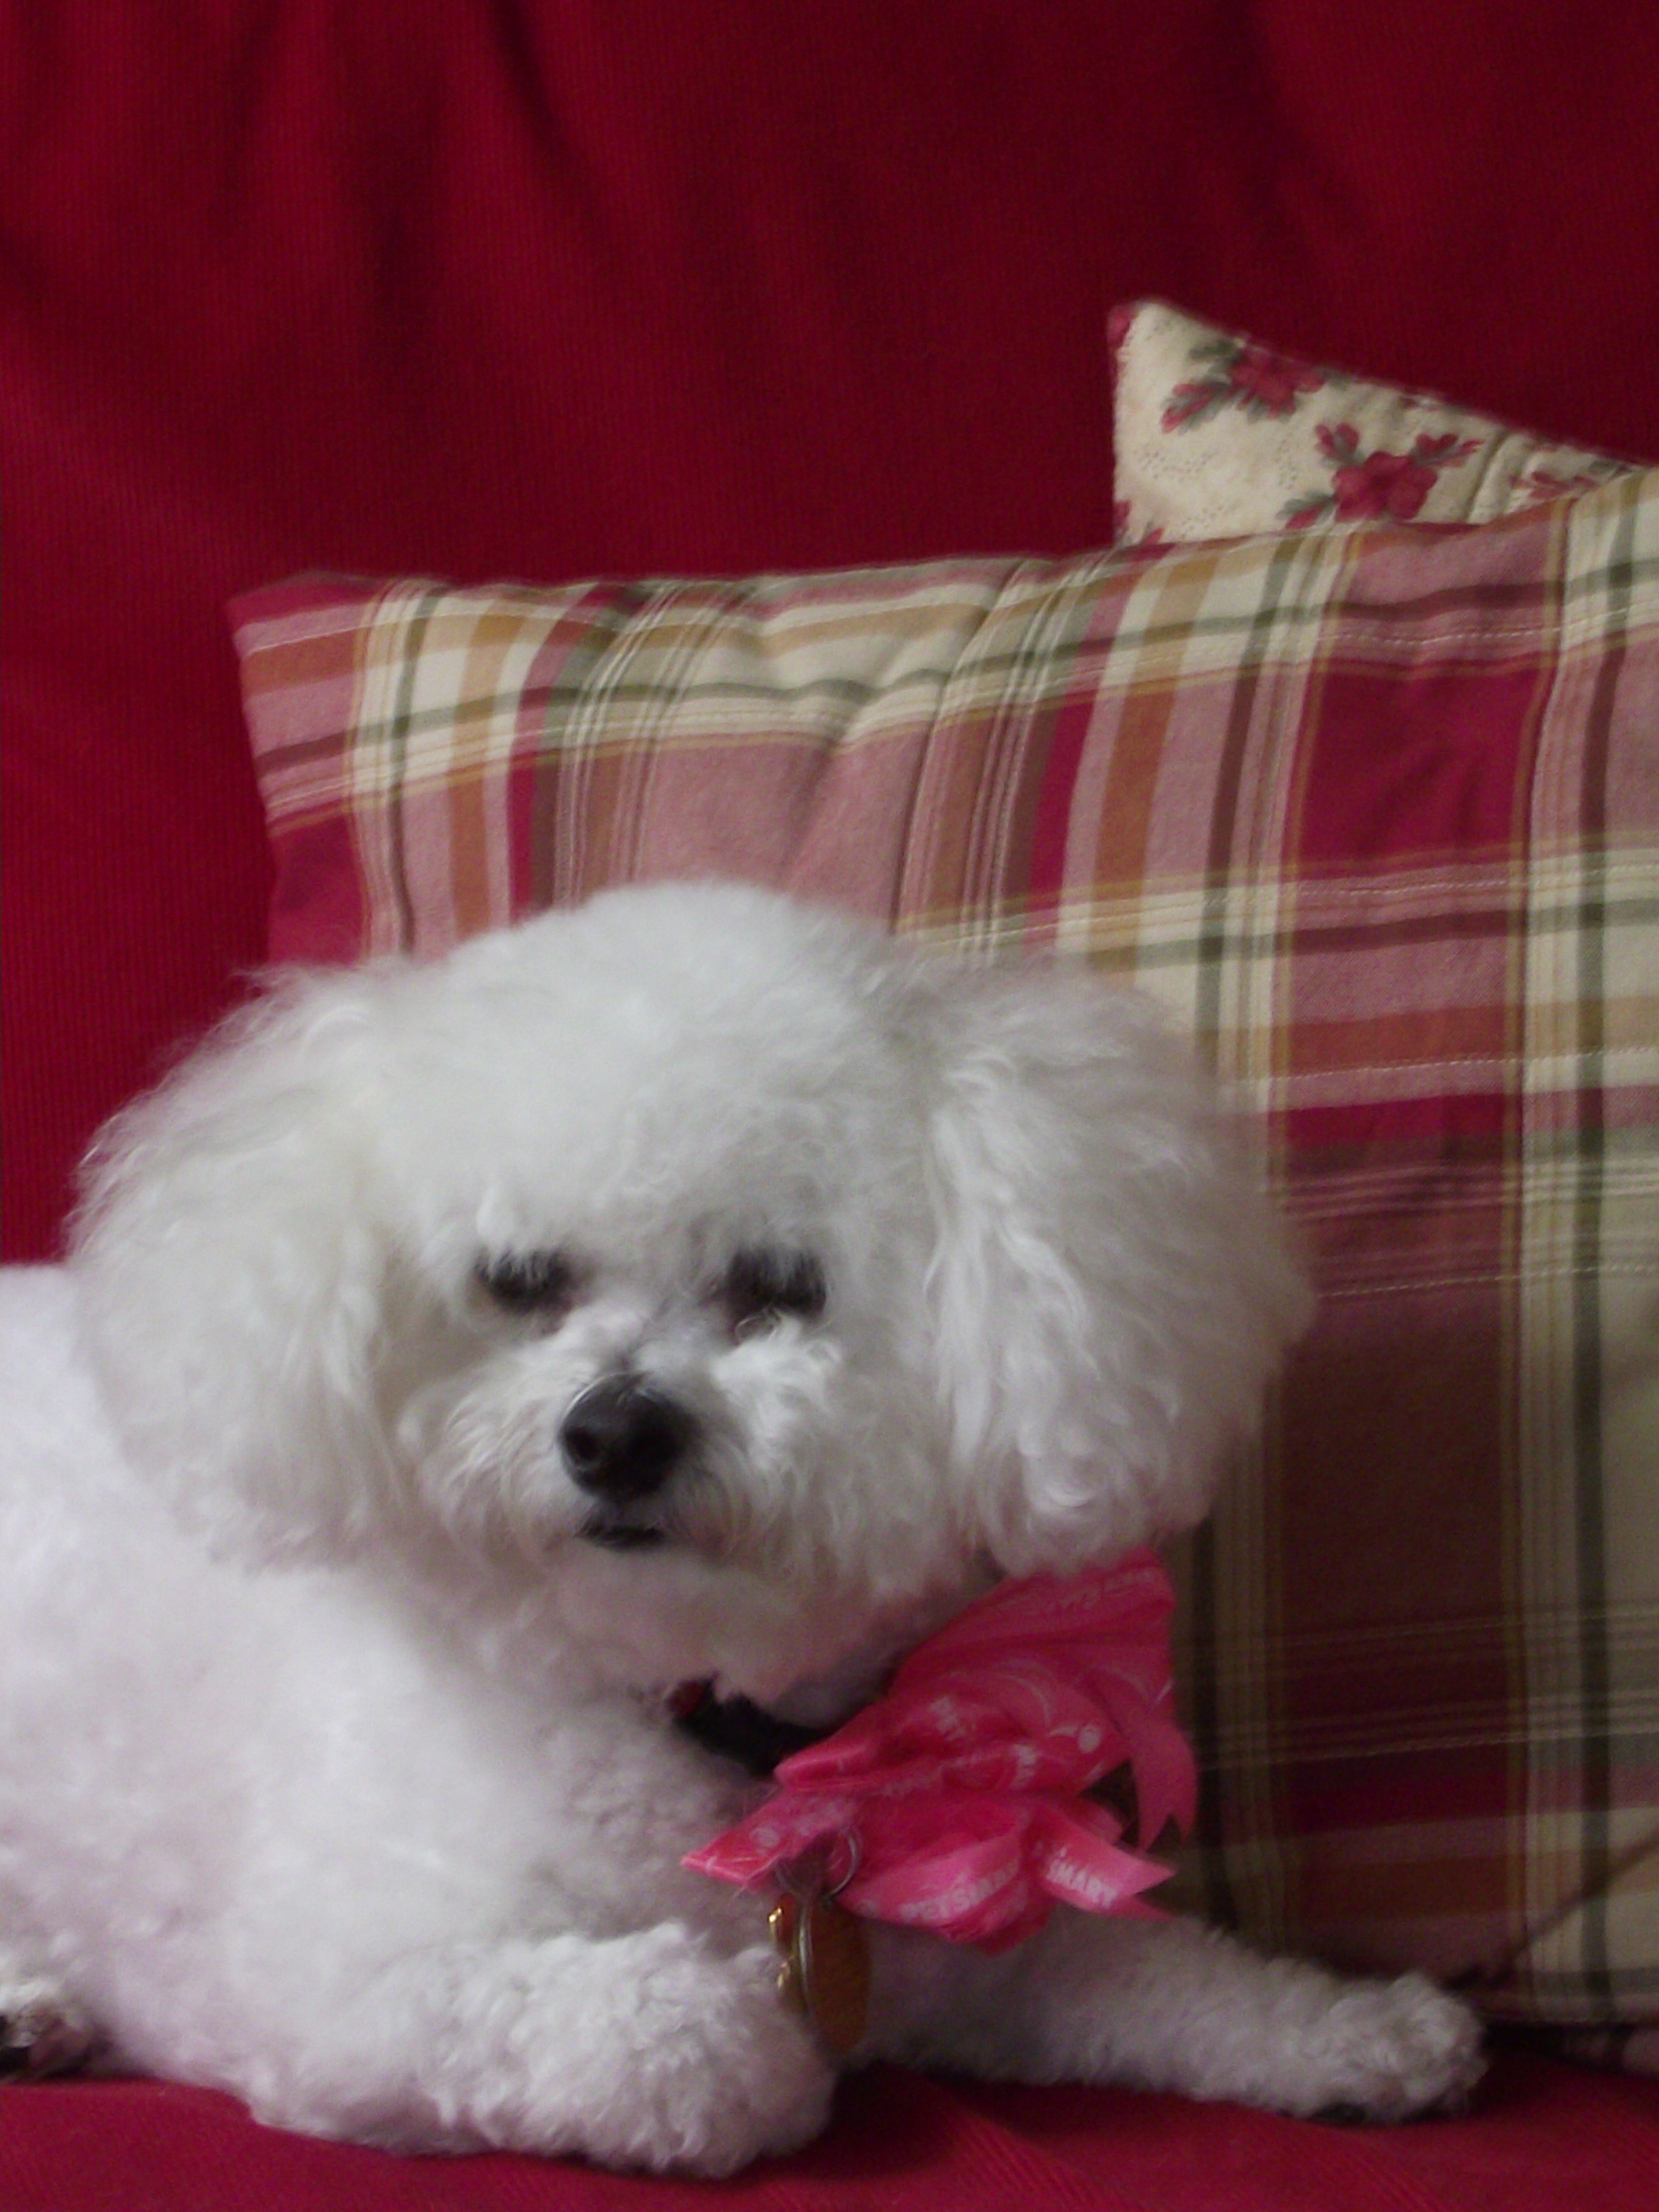 Here is our sweet little Cookie, relaxing in the sun room. Isn't she adorable?